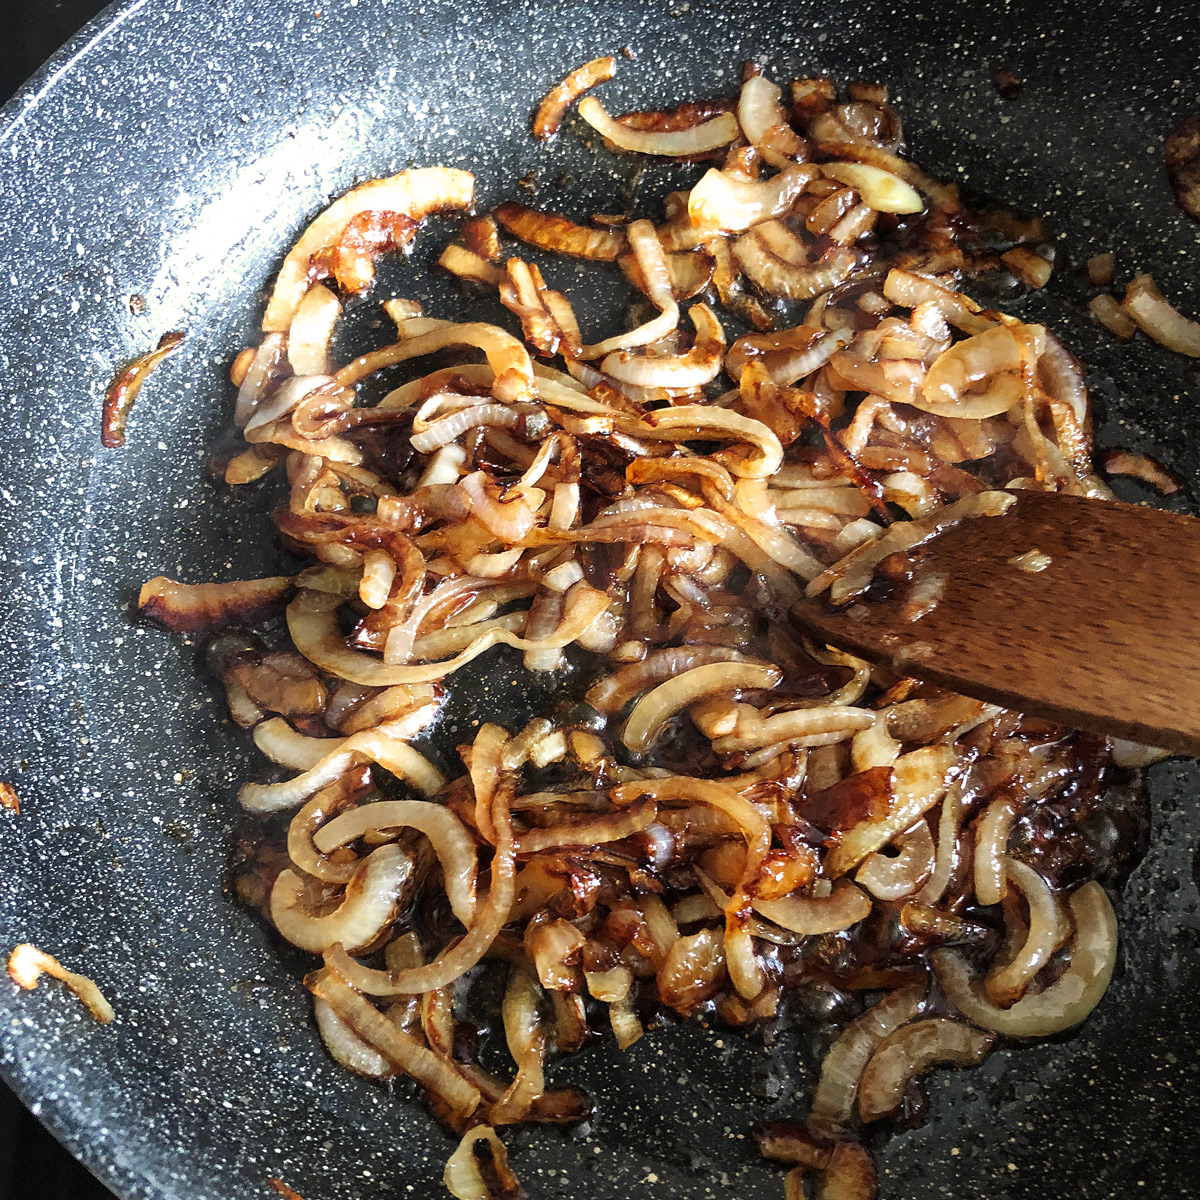 Golden-brown caramelised onion in a non-stick pan.